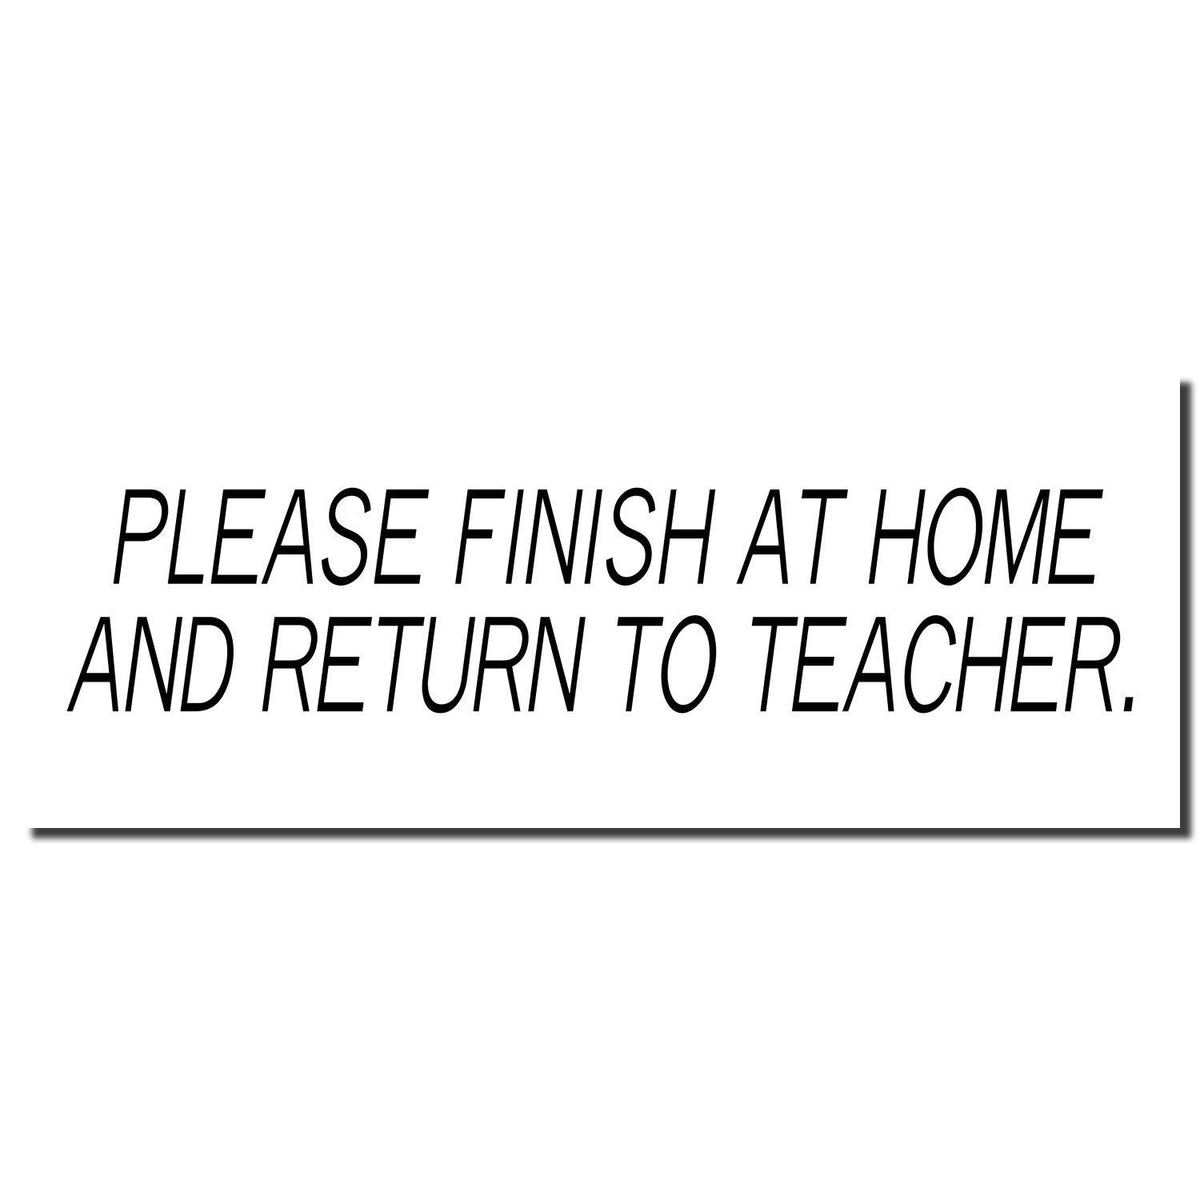 Please Finish At Home Return To Teacher Rubber Stamp - Engineer Seal Stamps - Brand_Acorn, Impression Size_Small, Stamp Type_Regular Stamp, Type of Use_Teacher